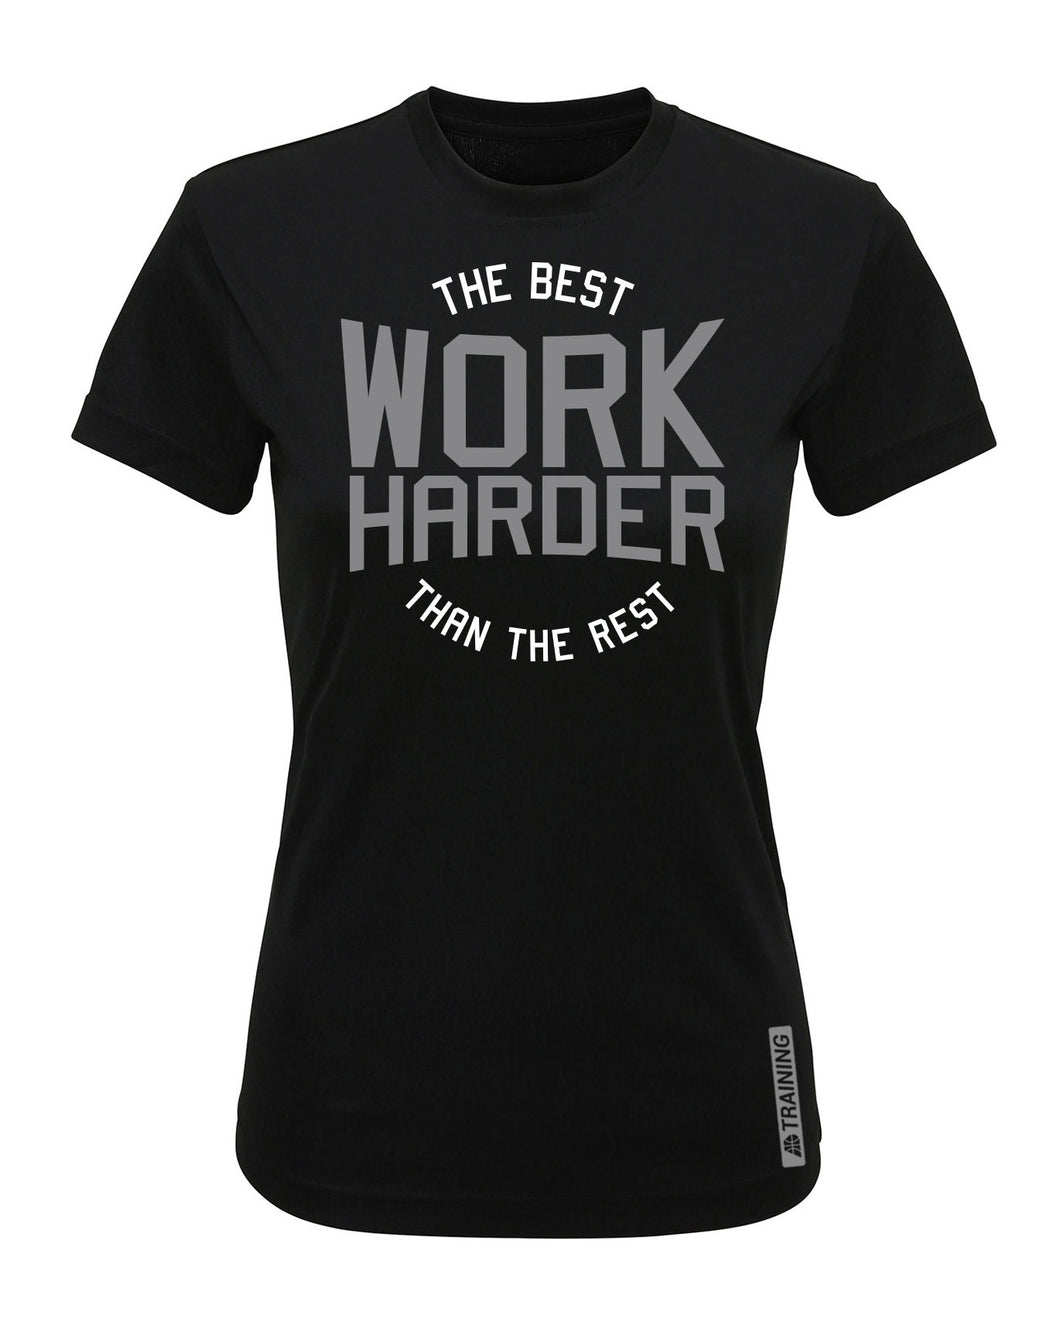 The Best Work Harder Than The Rest Womens Performance T-Shirt